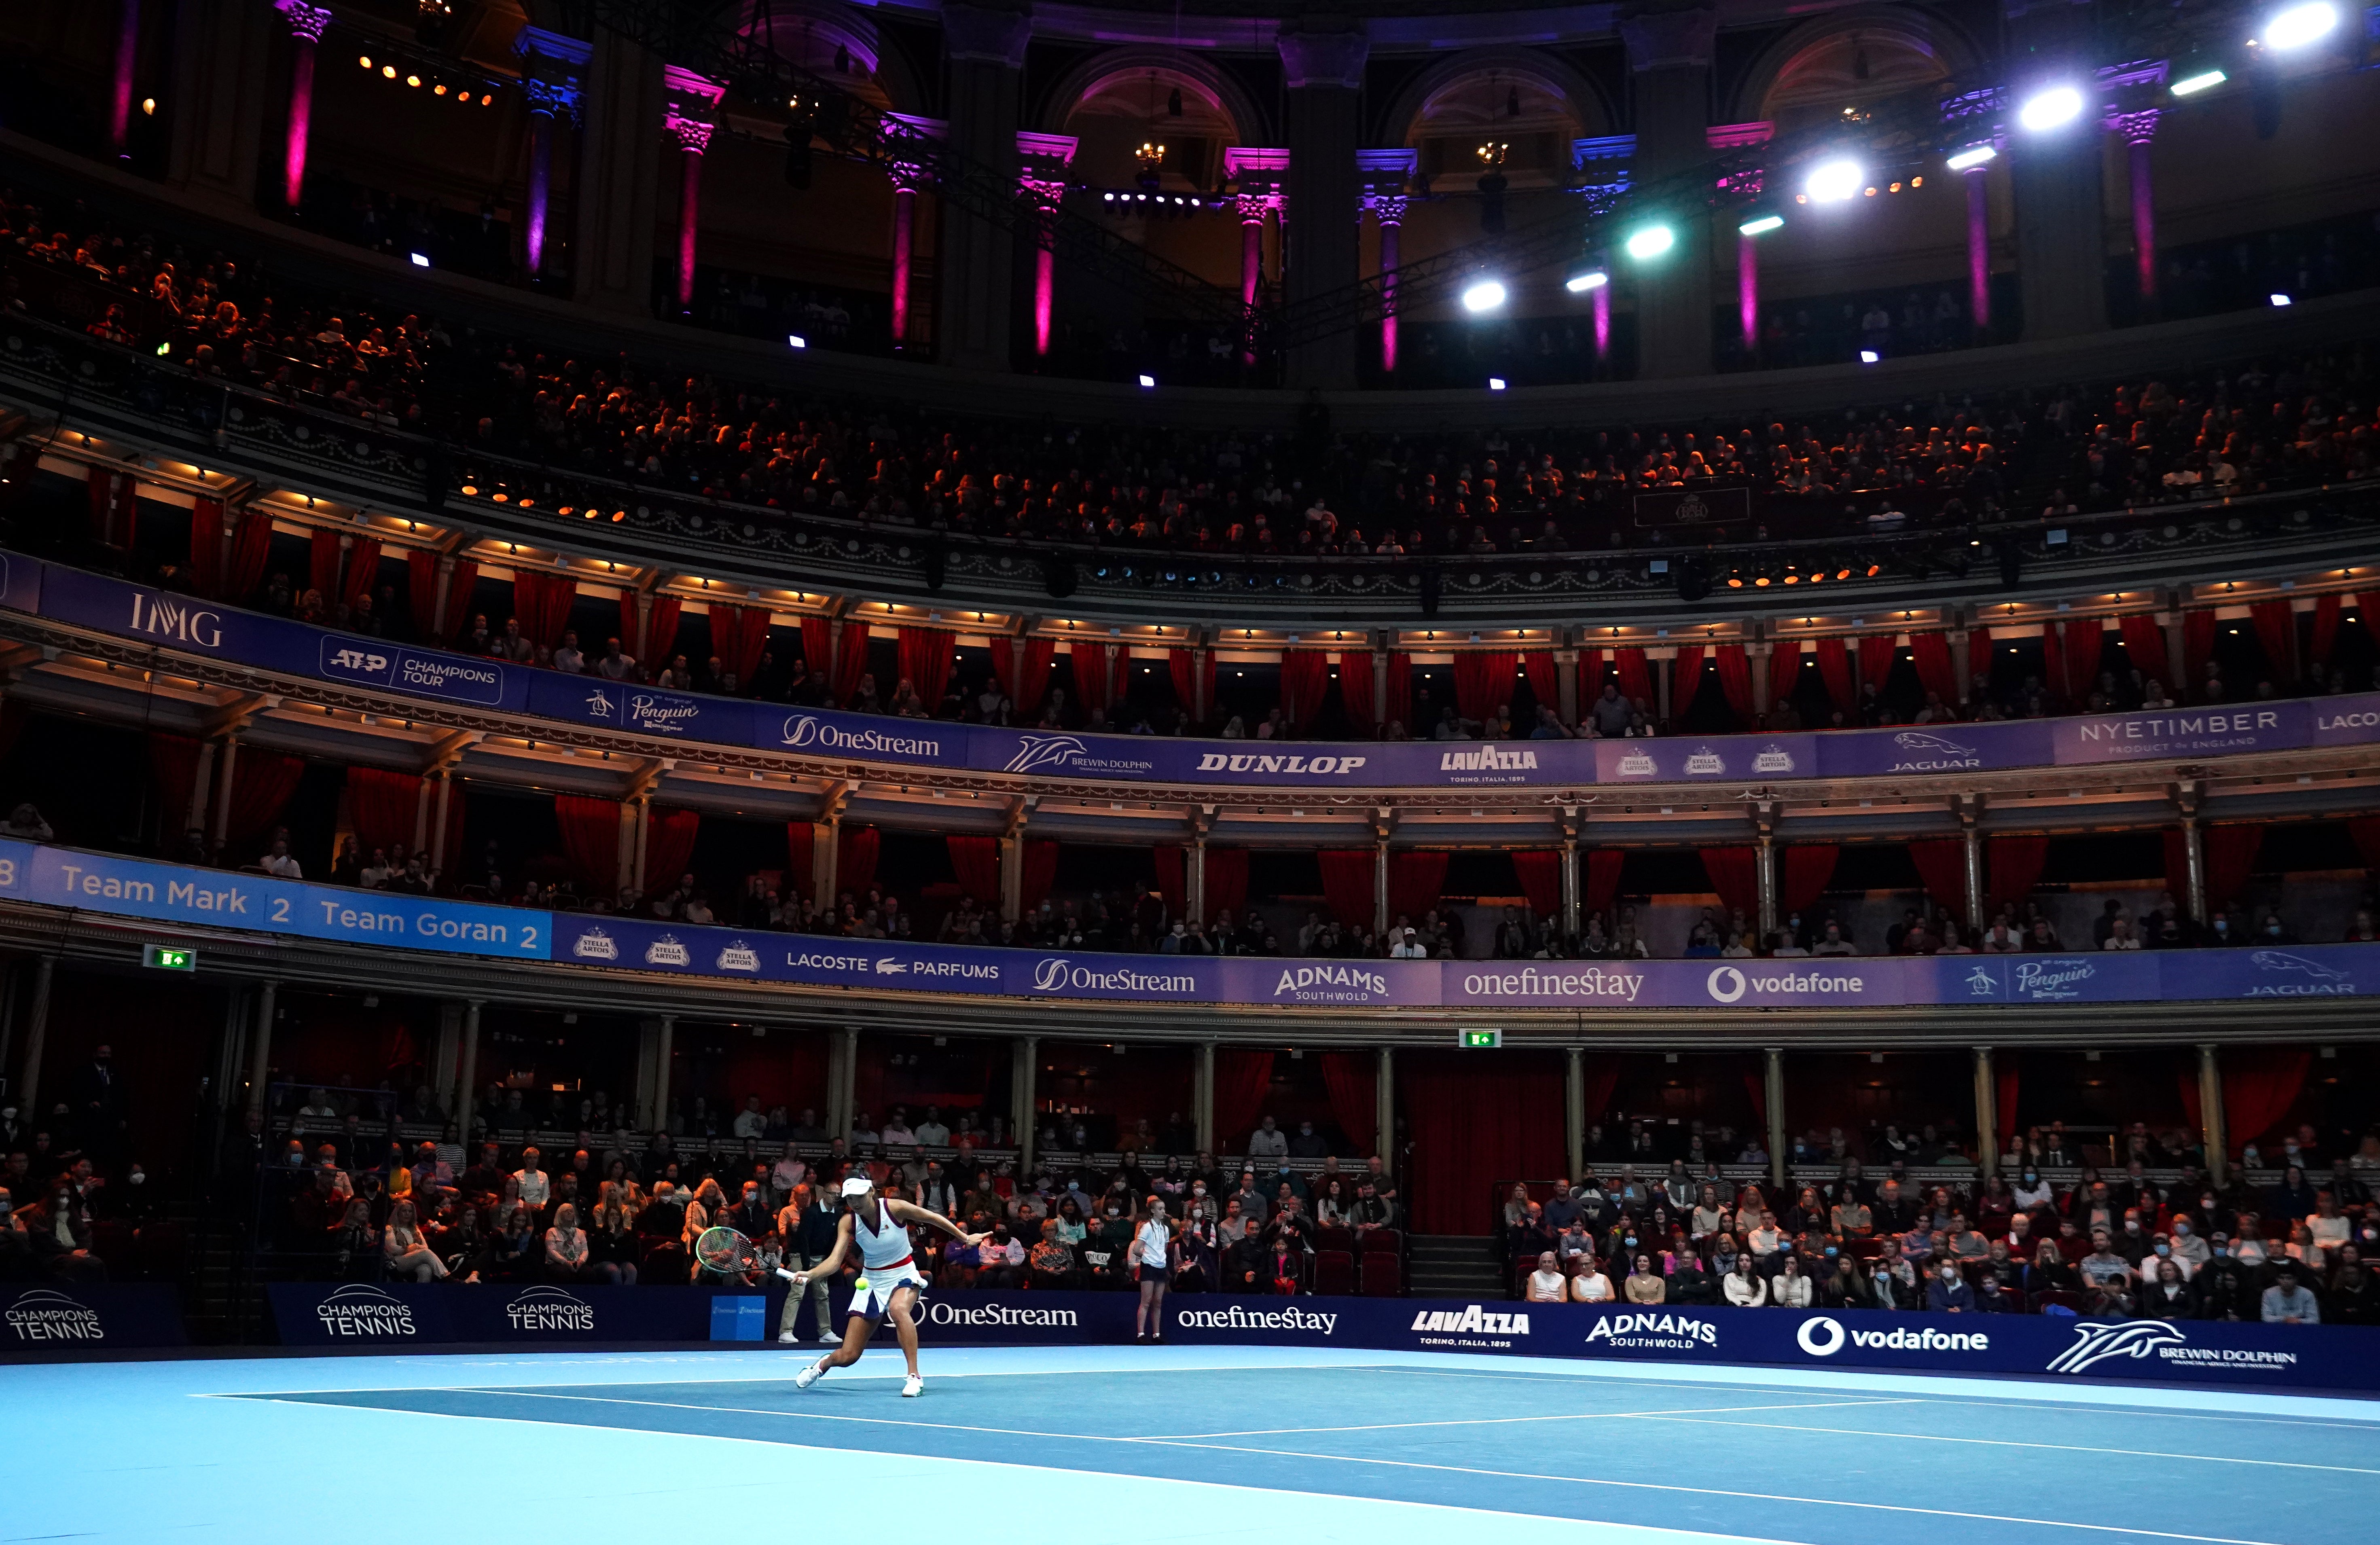 US Open champion Emma Raducanu made a winning return to Britain in the ATP Champions Tour event held at London’s Royal Albert Hall, defeating Romanian Elena-Gabriela Ruse in an exhibition match on Sunday (Zac Goodwin/PA)